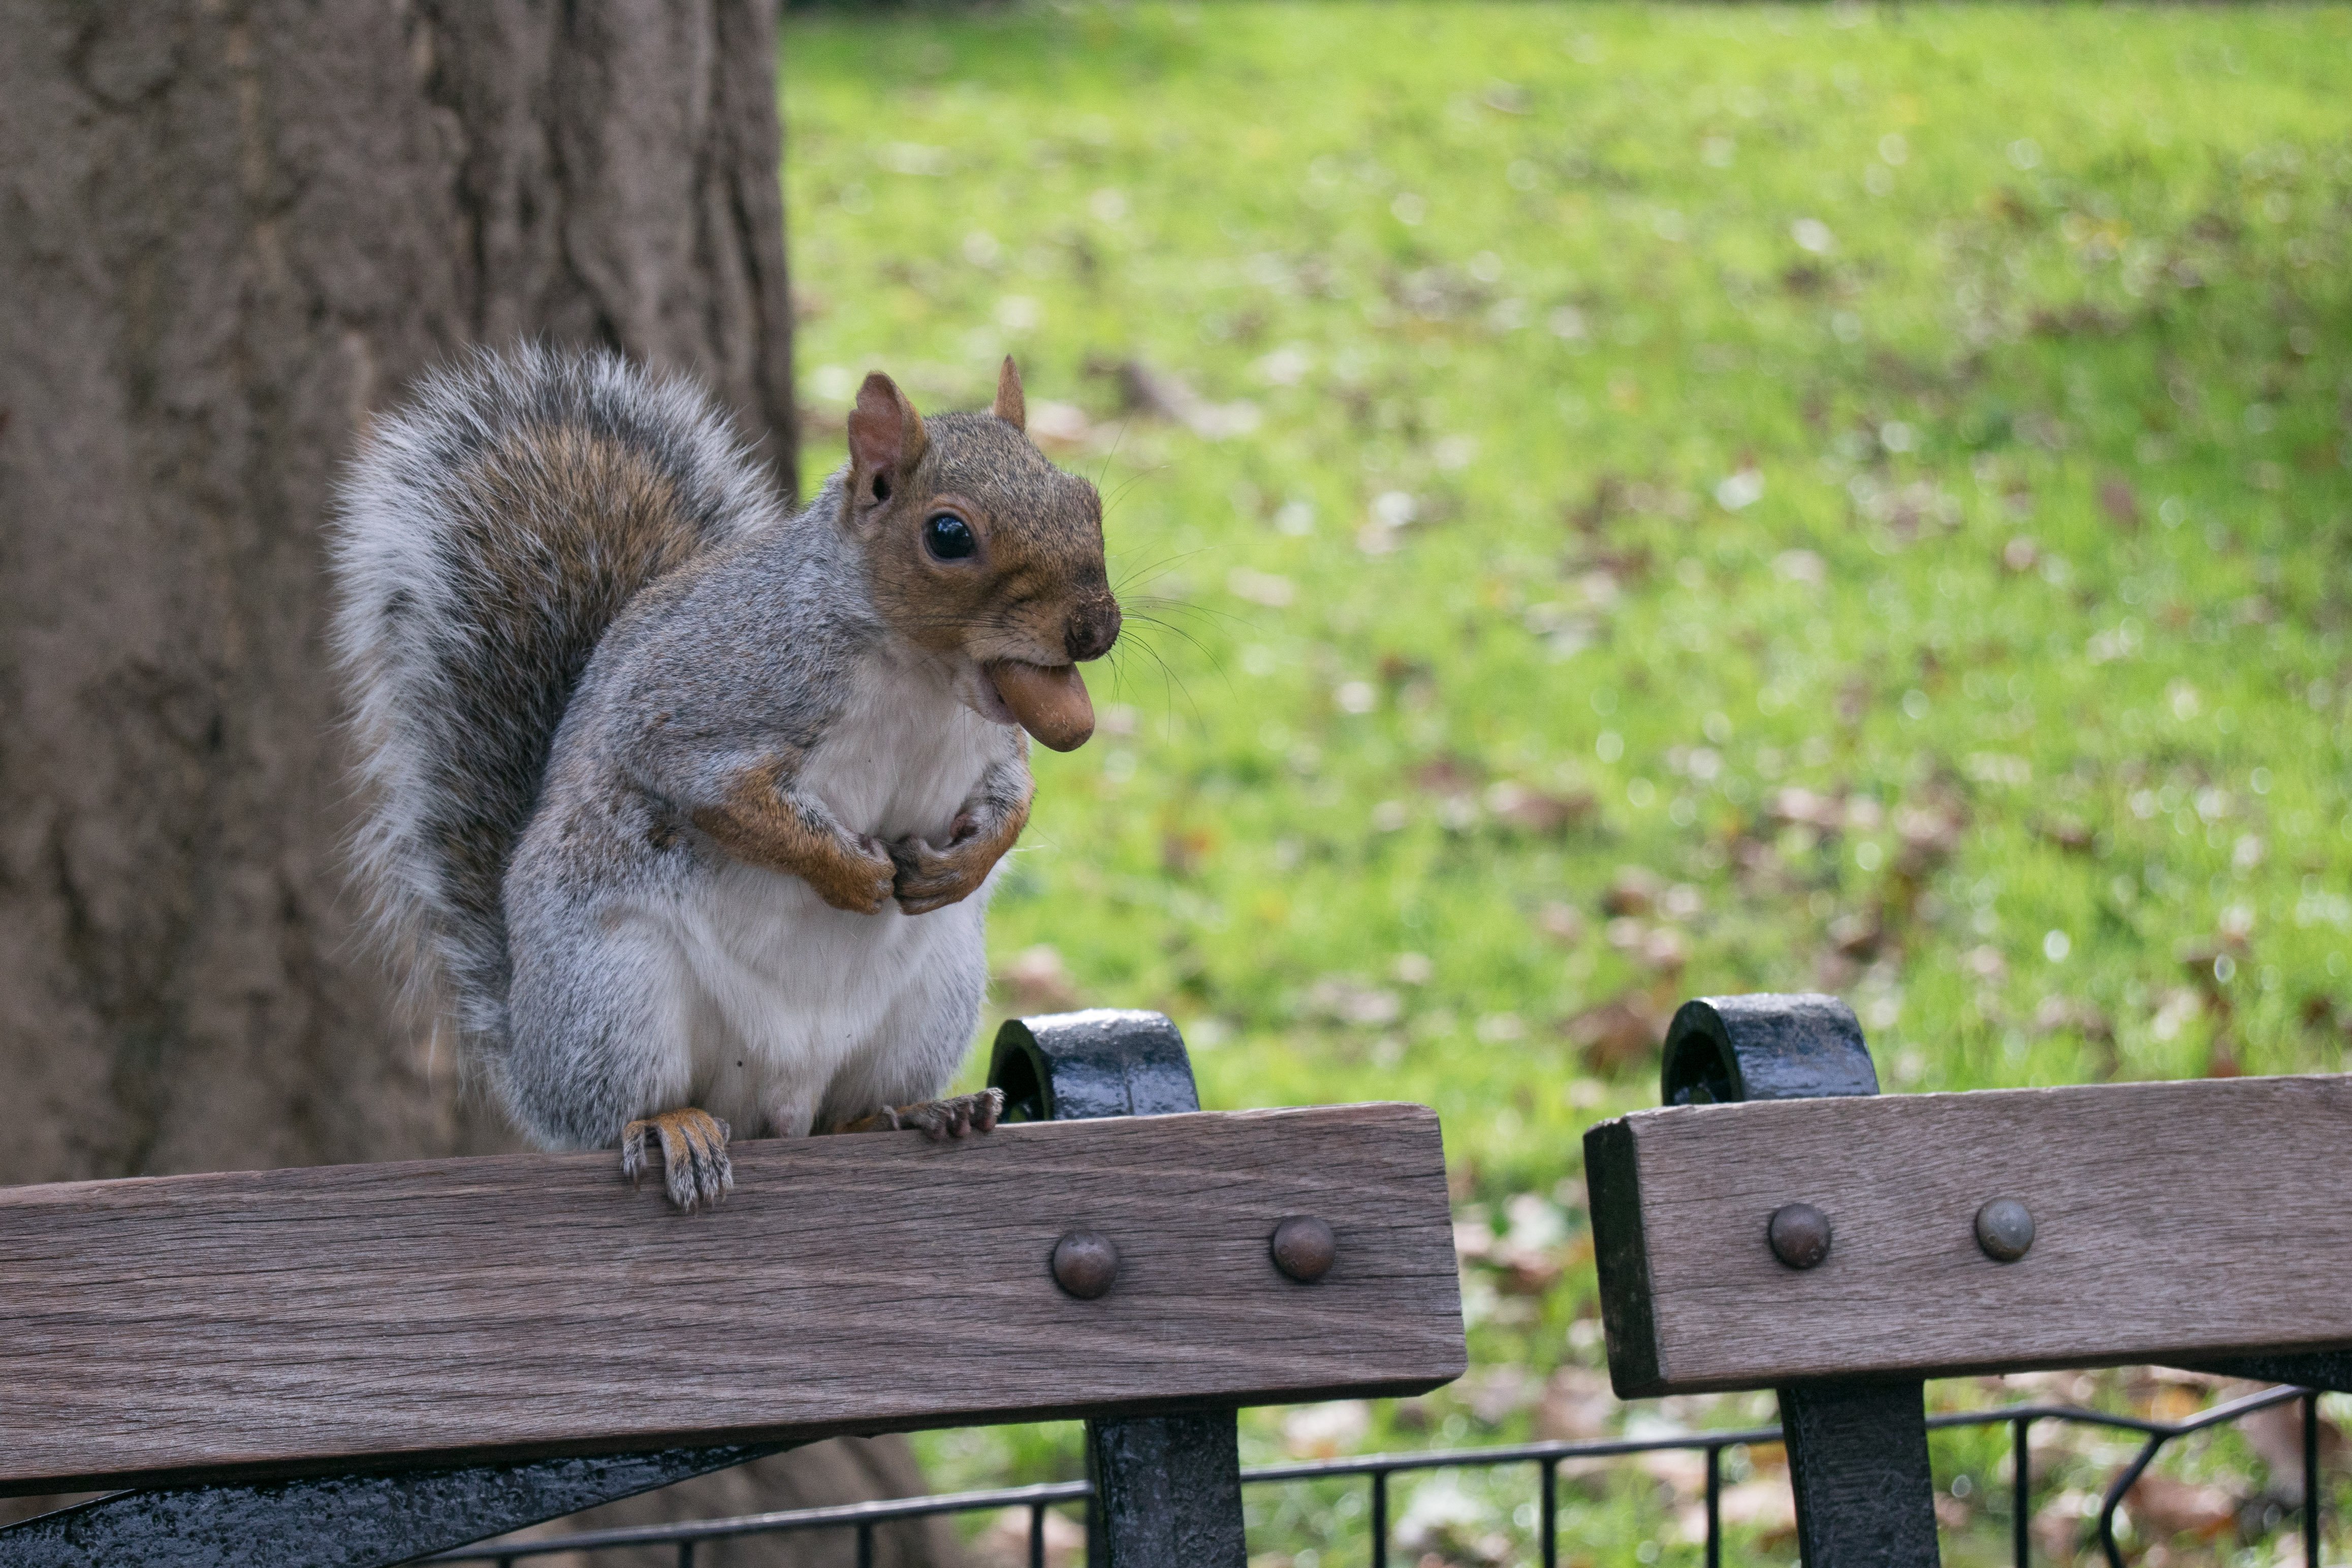 A squirrel with a nut